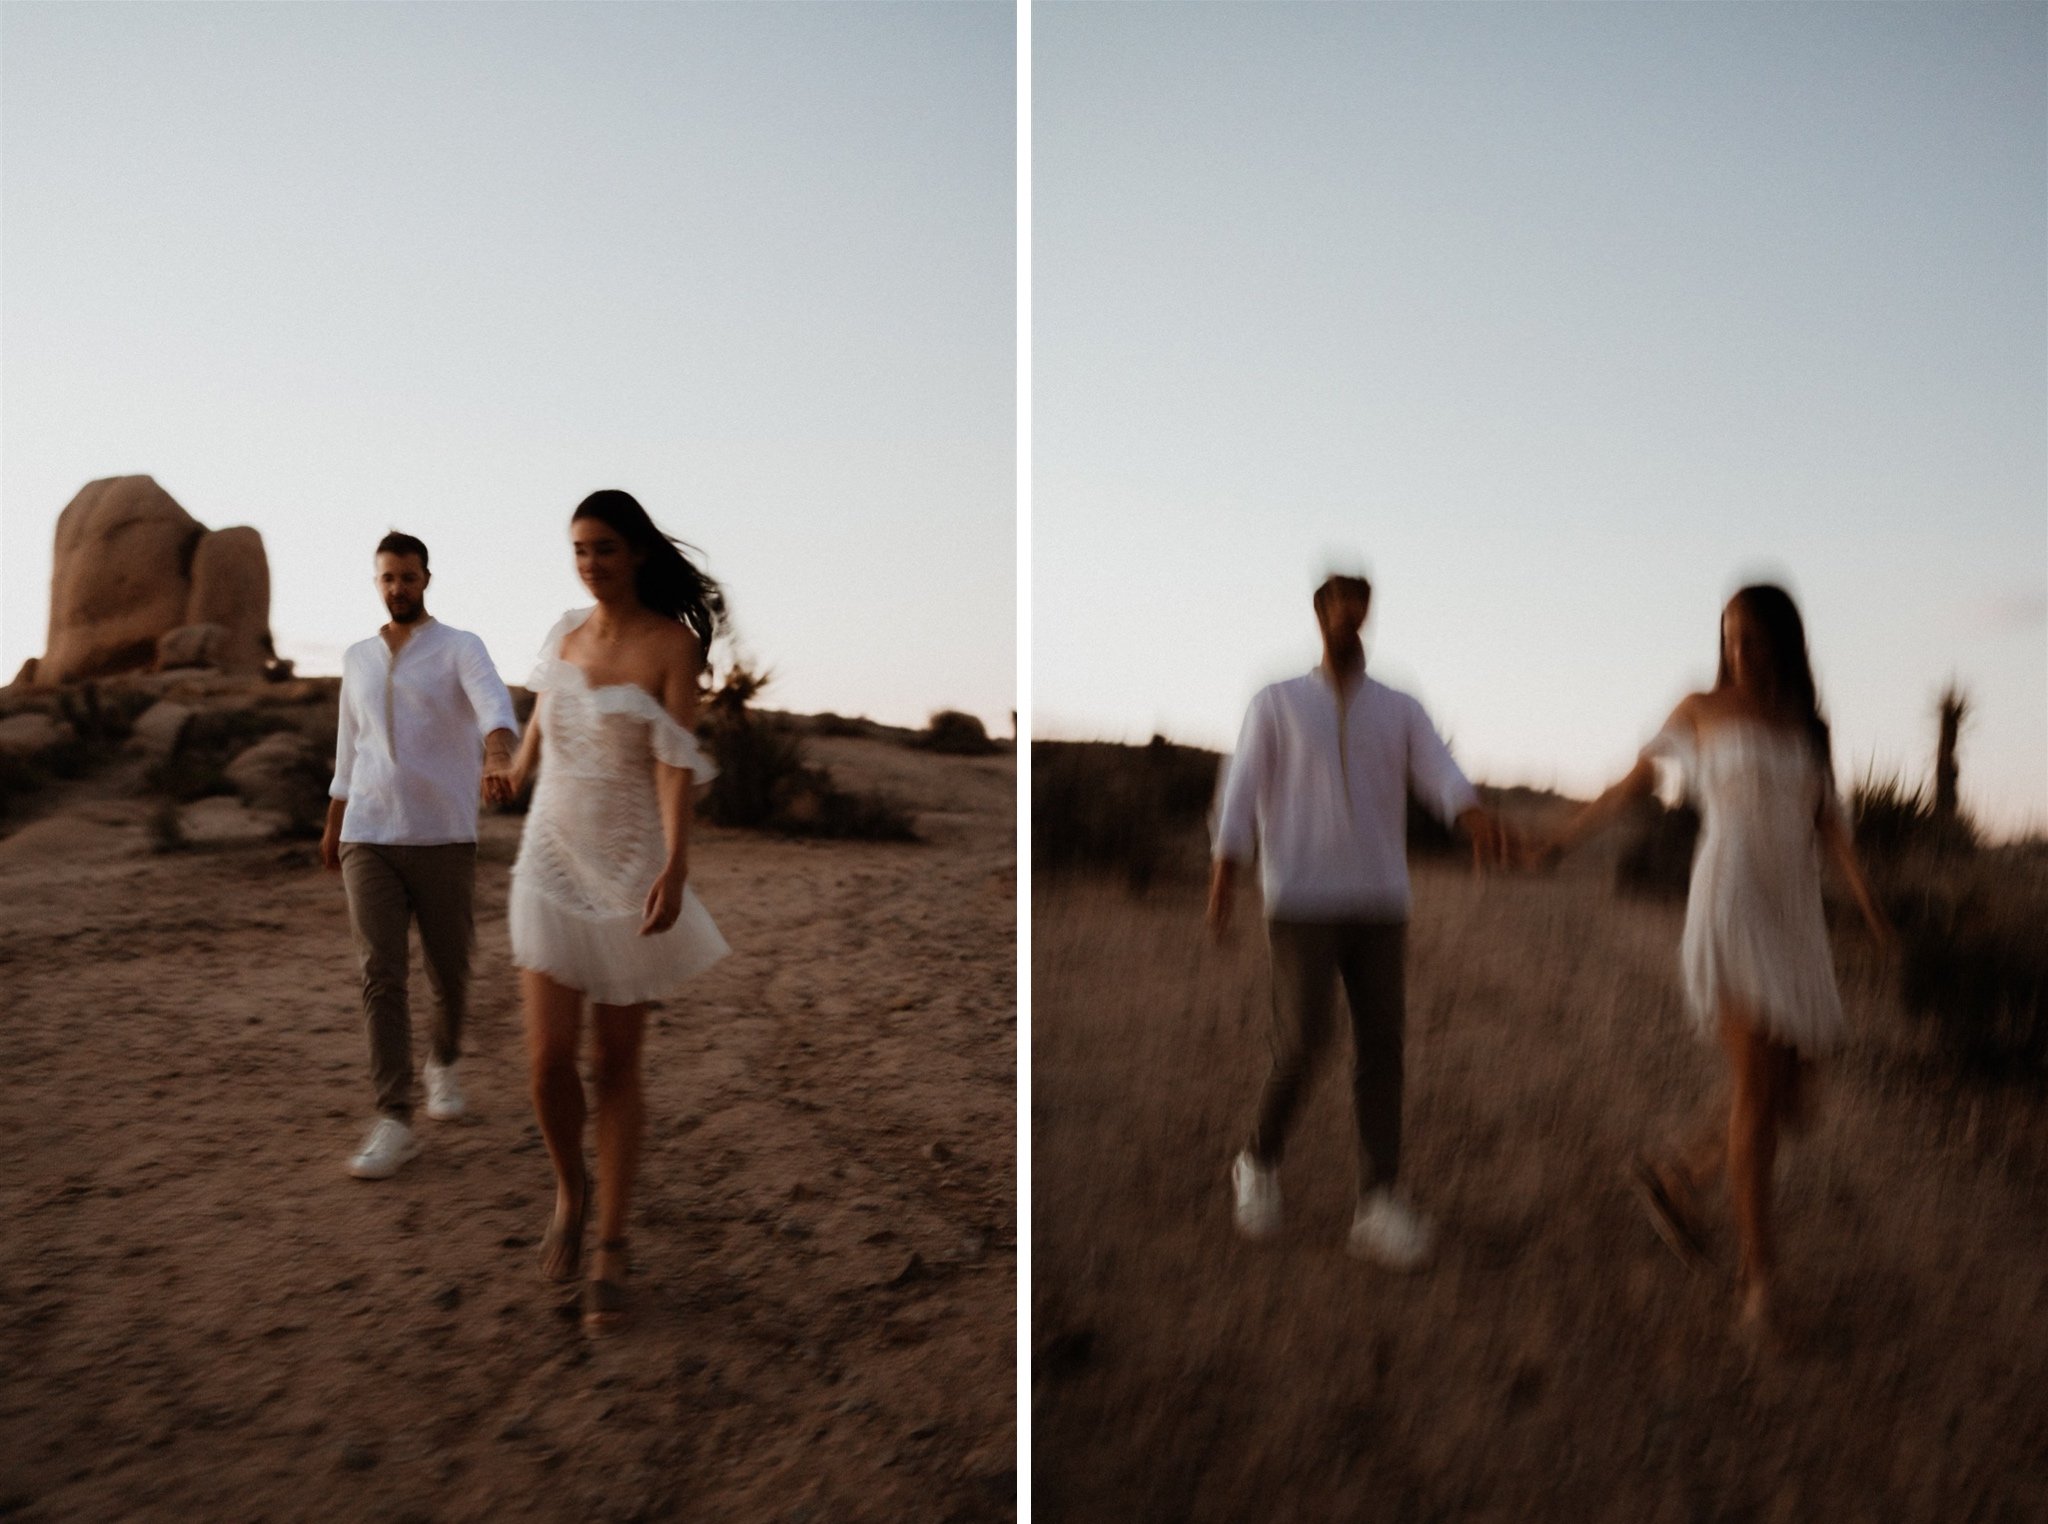 Joshua Tree Couples Session Surprise Proposal - Will Khoury Photography_55.jpg